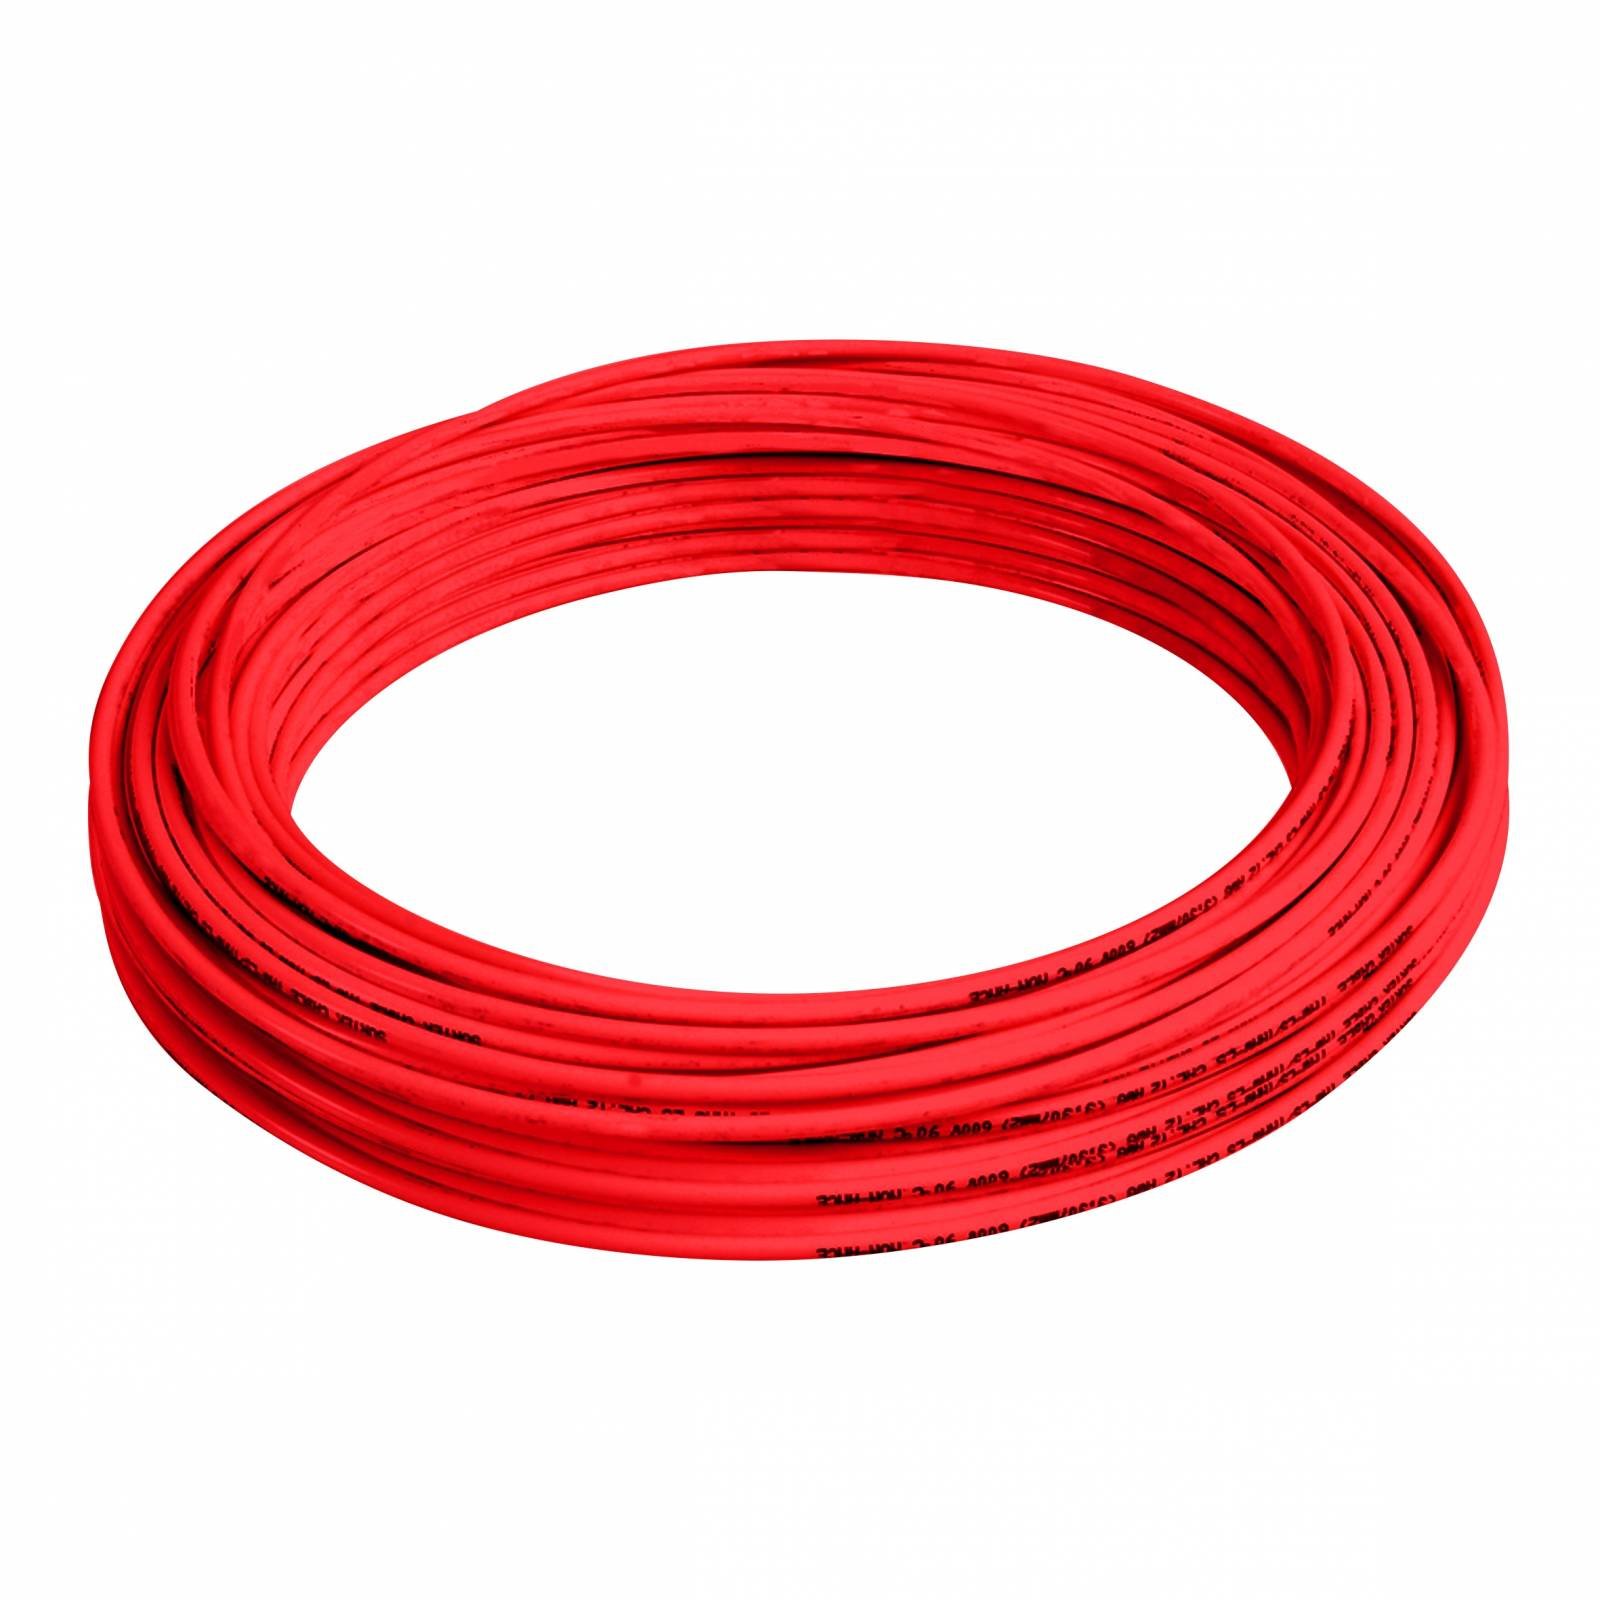 Cable Eléctrico Tipo Thw-ls/thhw-ls Cal.10 100m Rojo 136915 